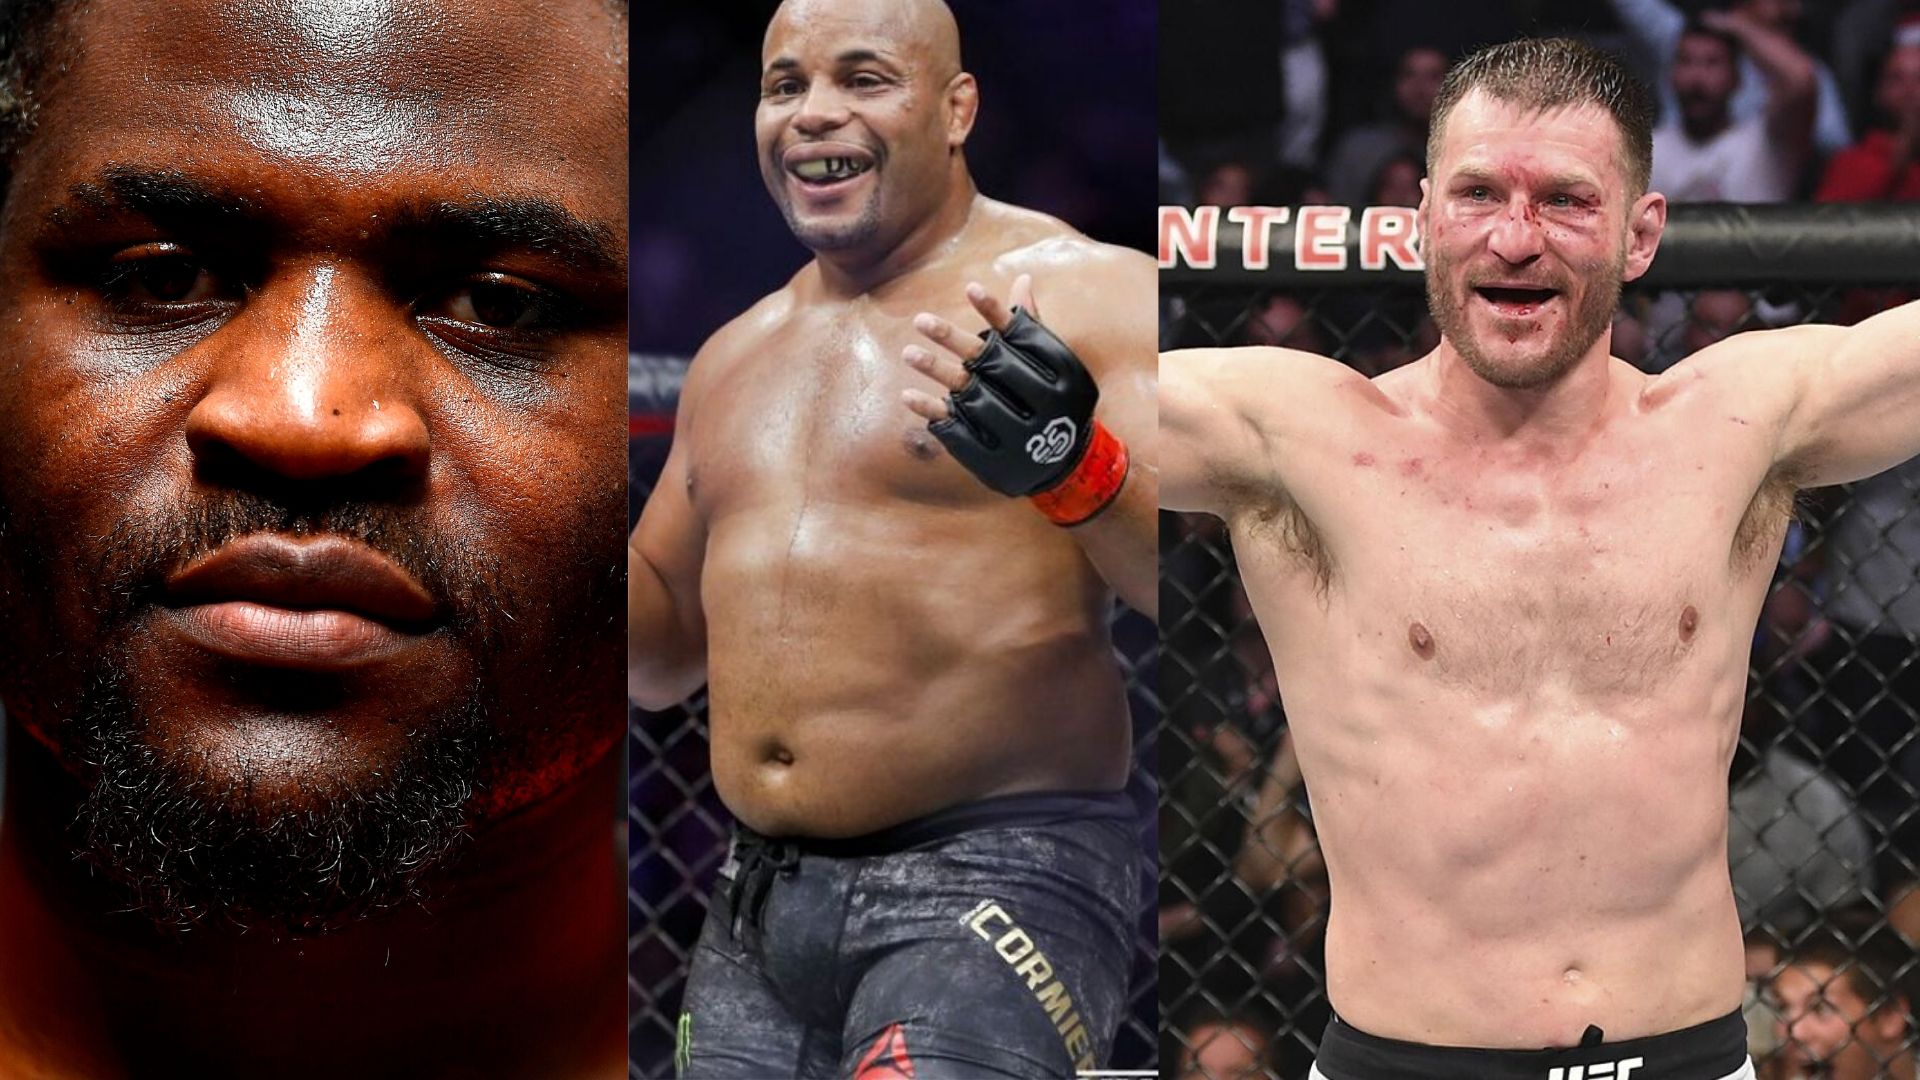 Francis Ngannou wants to fight Stipe Miocic over Daniel Cormier